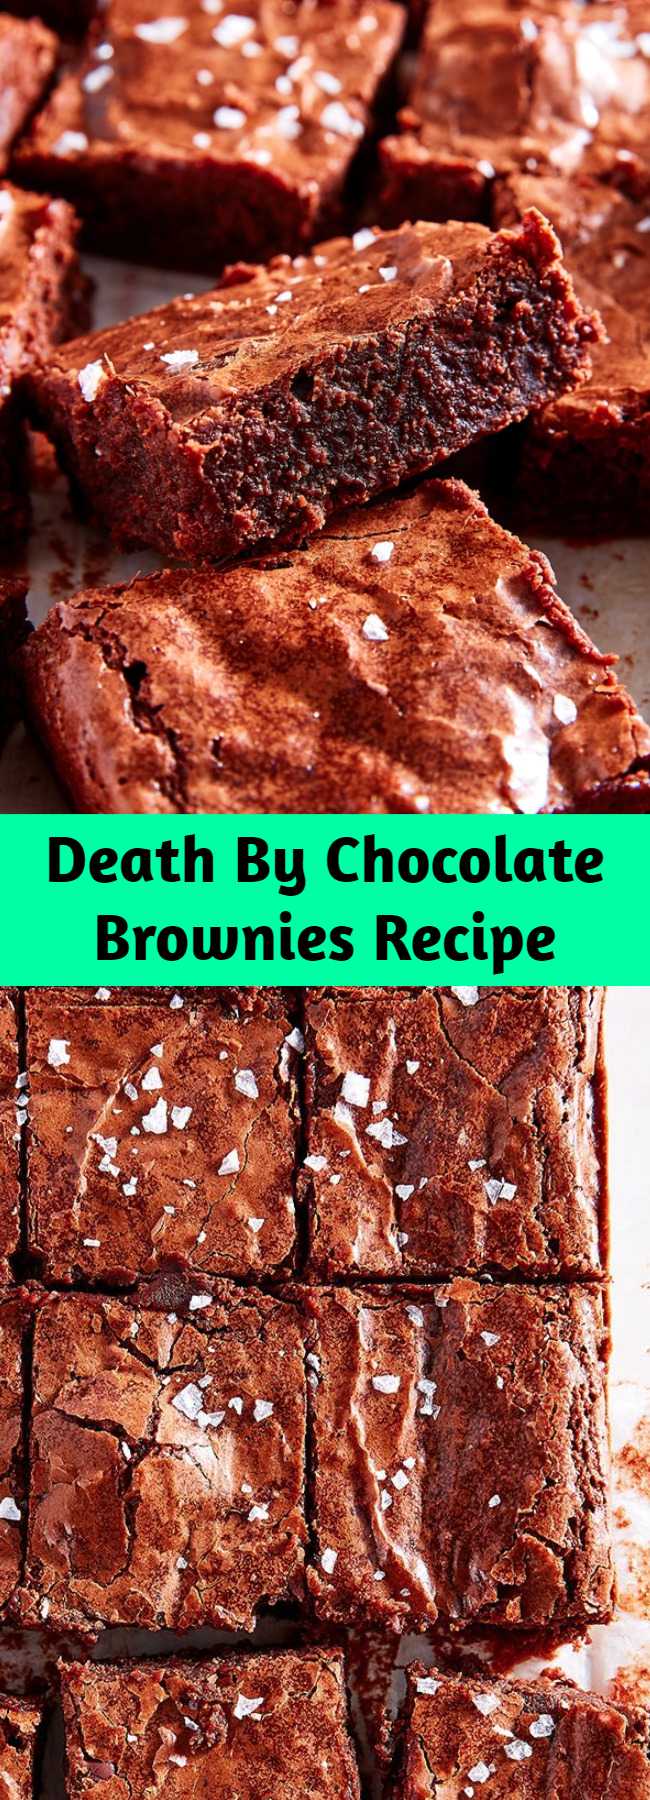 Death By Chocolate Brownies Recipe - Death By Chocolate Brownies Recipe - Check out this easy recipe for the best ever chocolate brownies. Fudgy on the inside with that iconic crackly top, these brownies will not fail you. These mighttt be the best brownies you ever make.